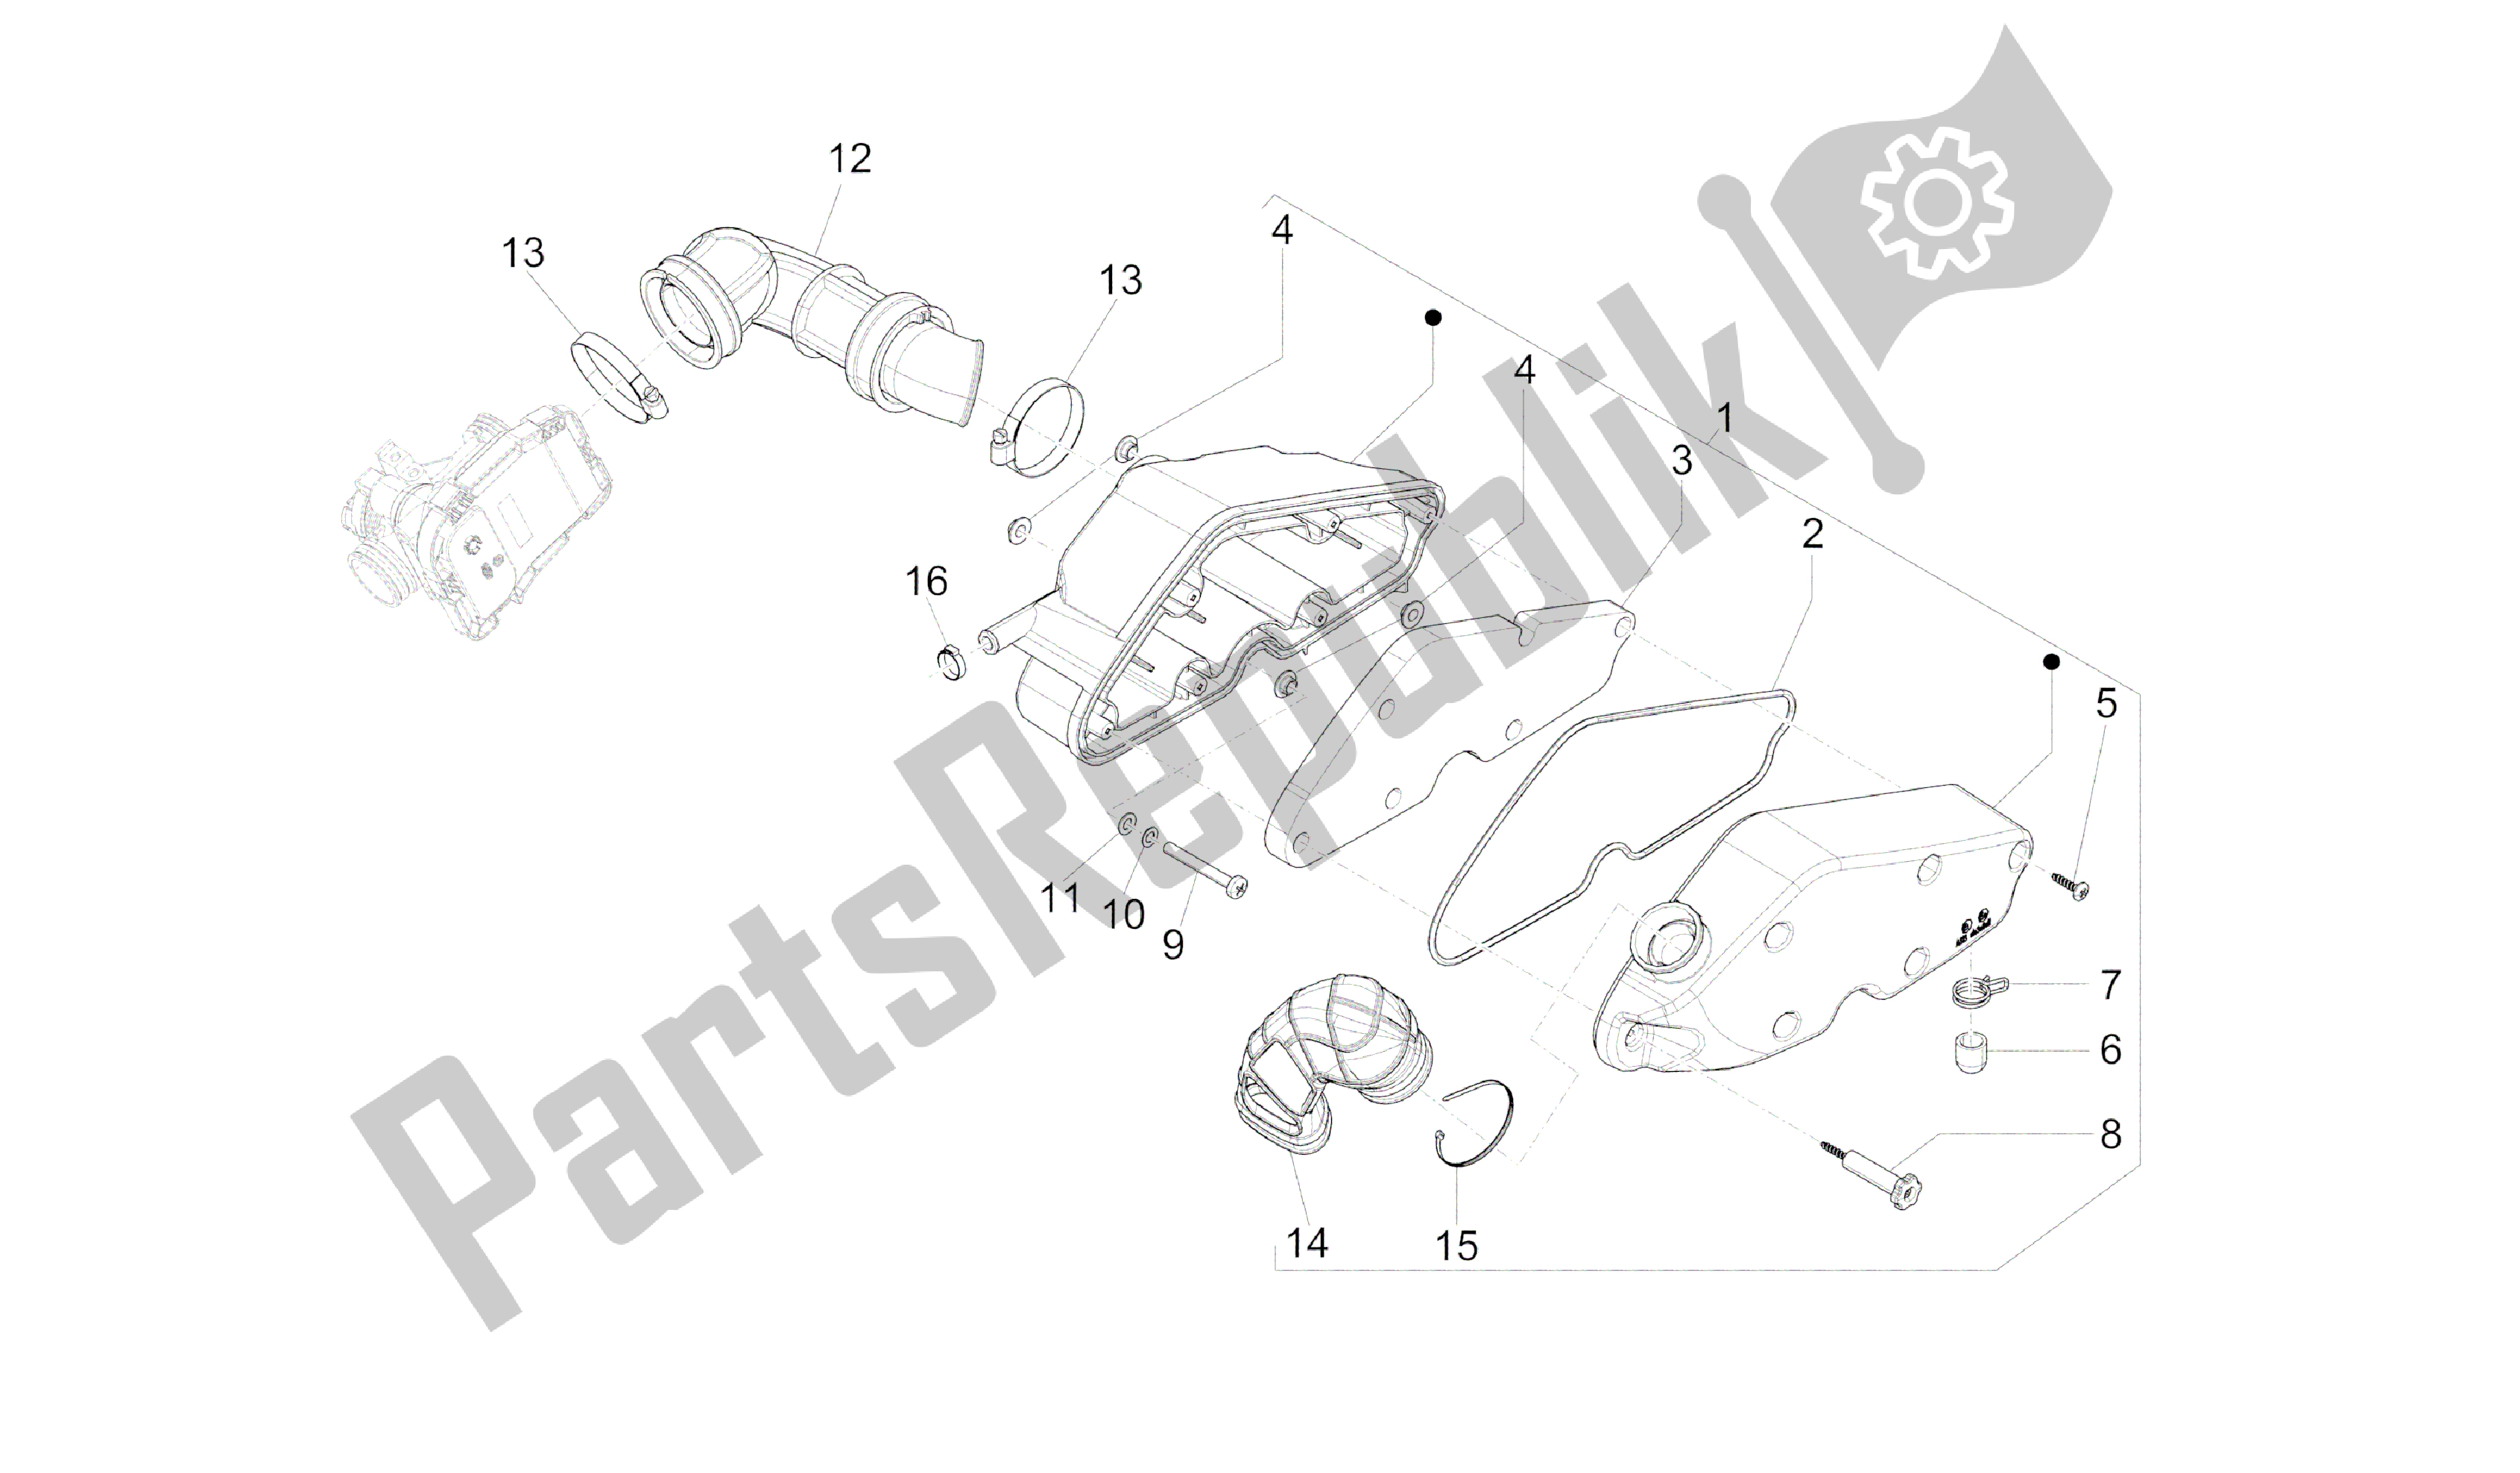 All parts for the Air Filter of the Vespa 946 150 2013 - 2014